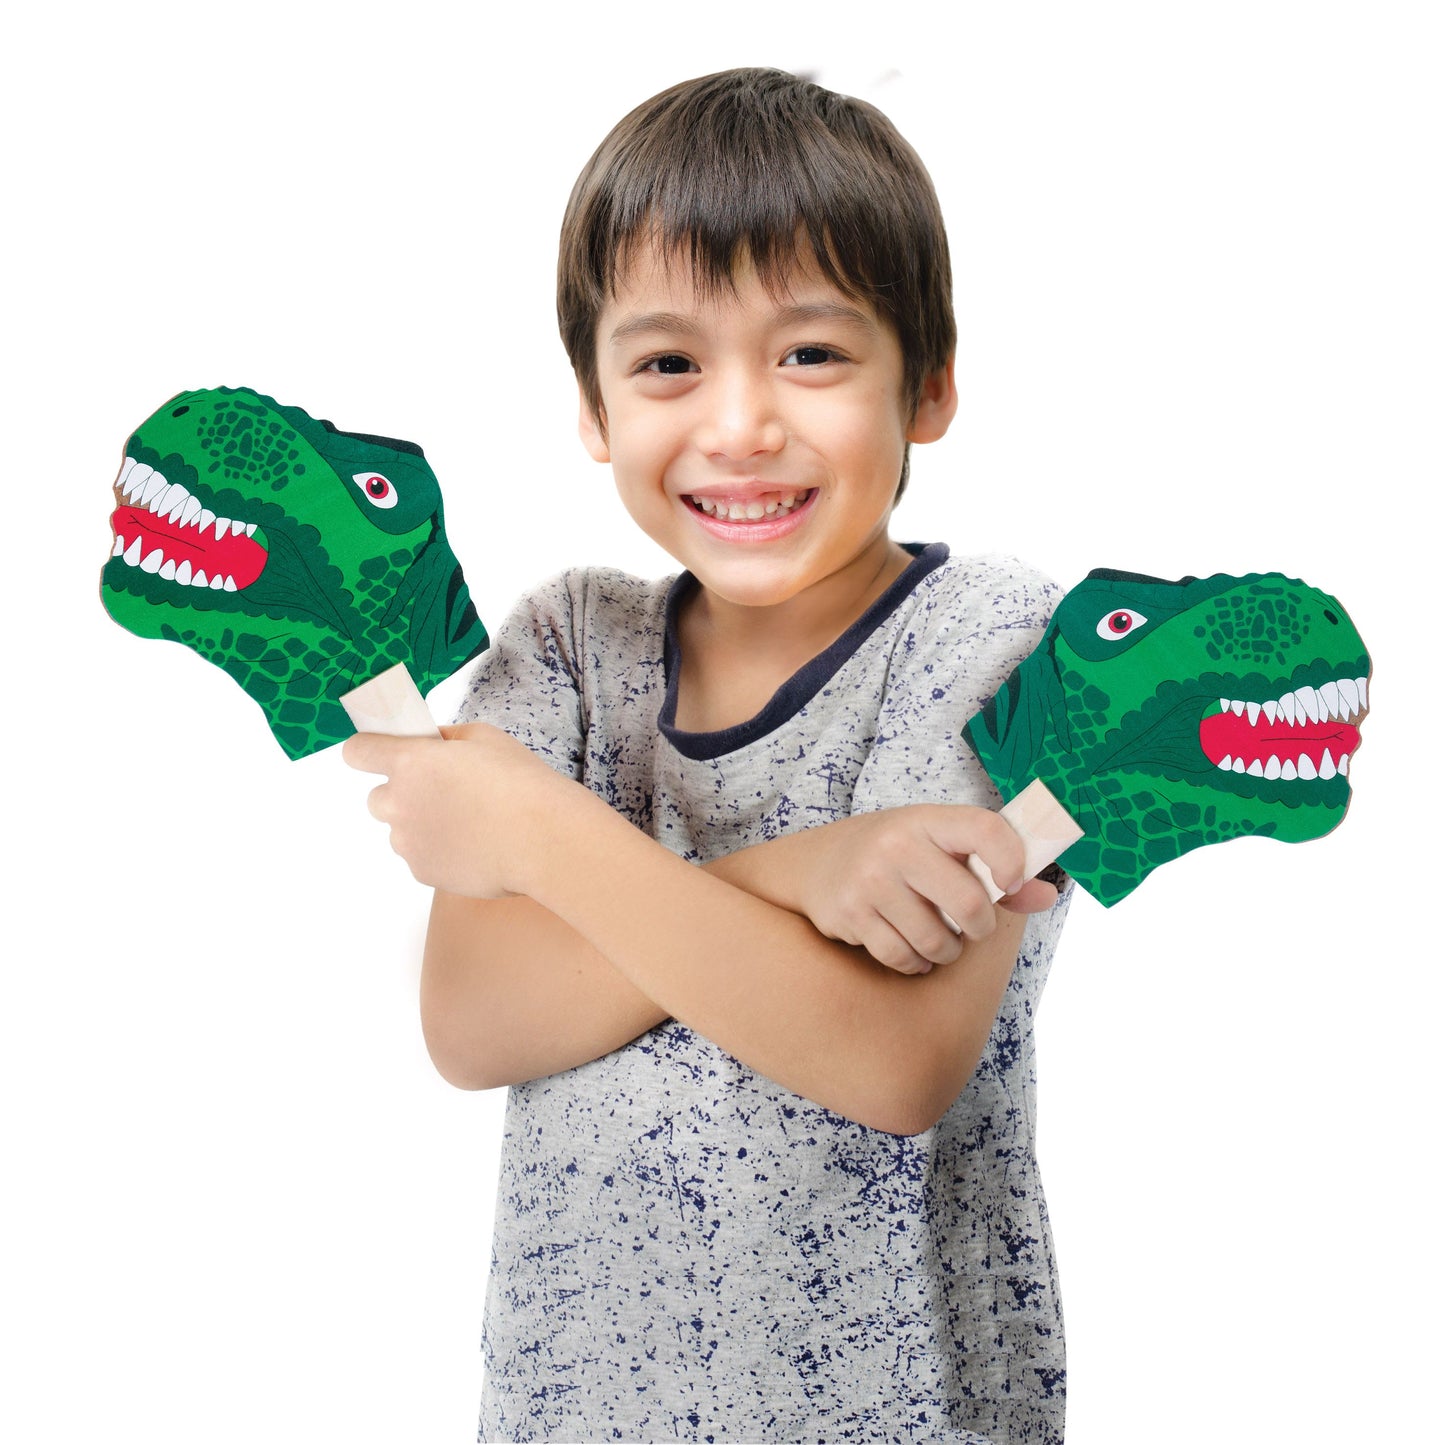 IS GIFT T Rex Table Tennis Ping Pong Set